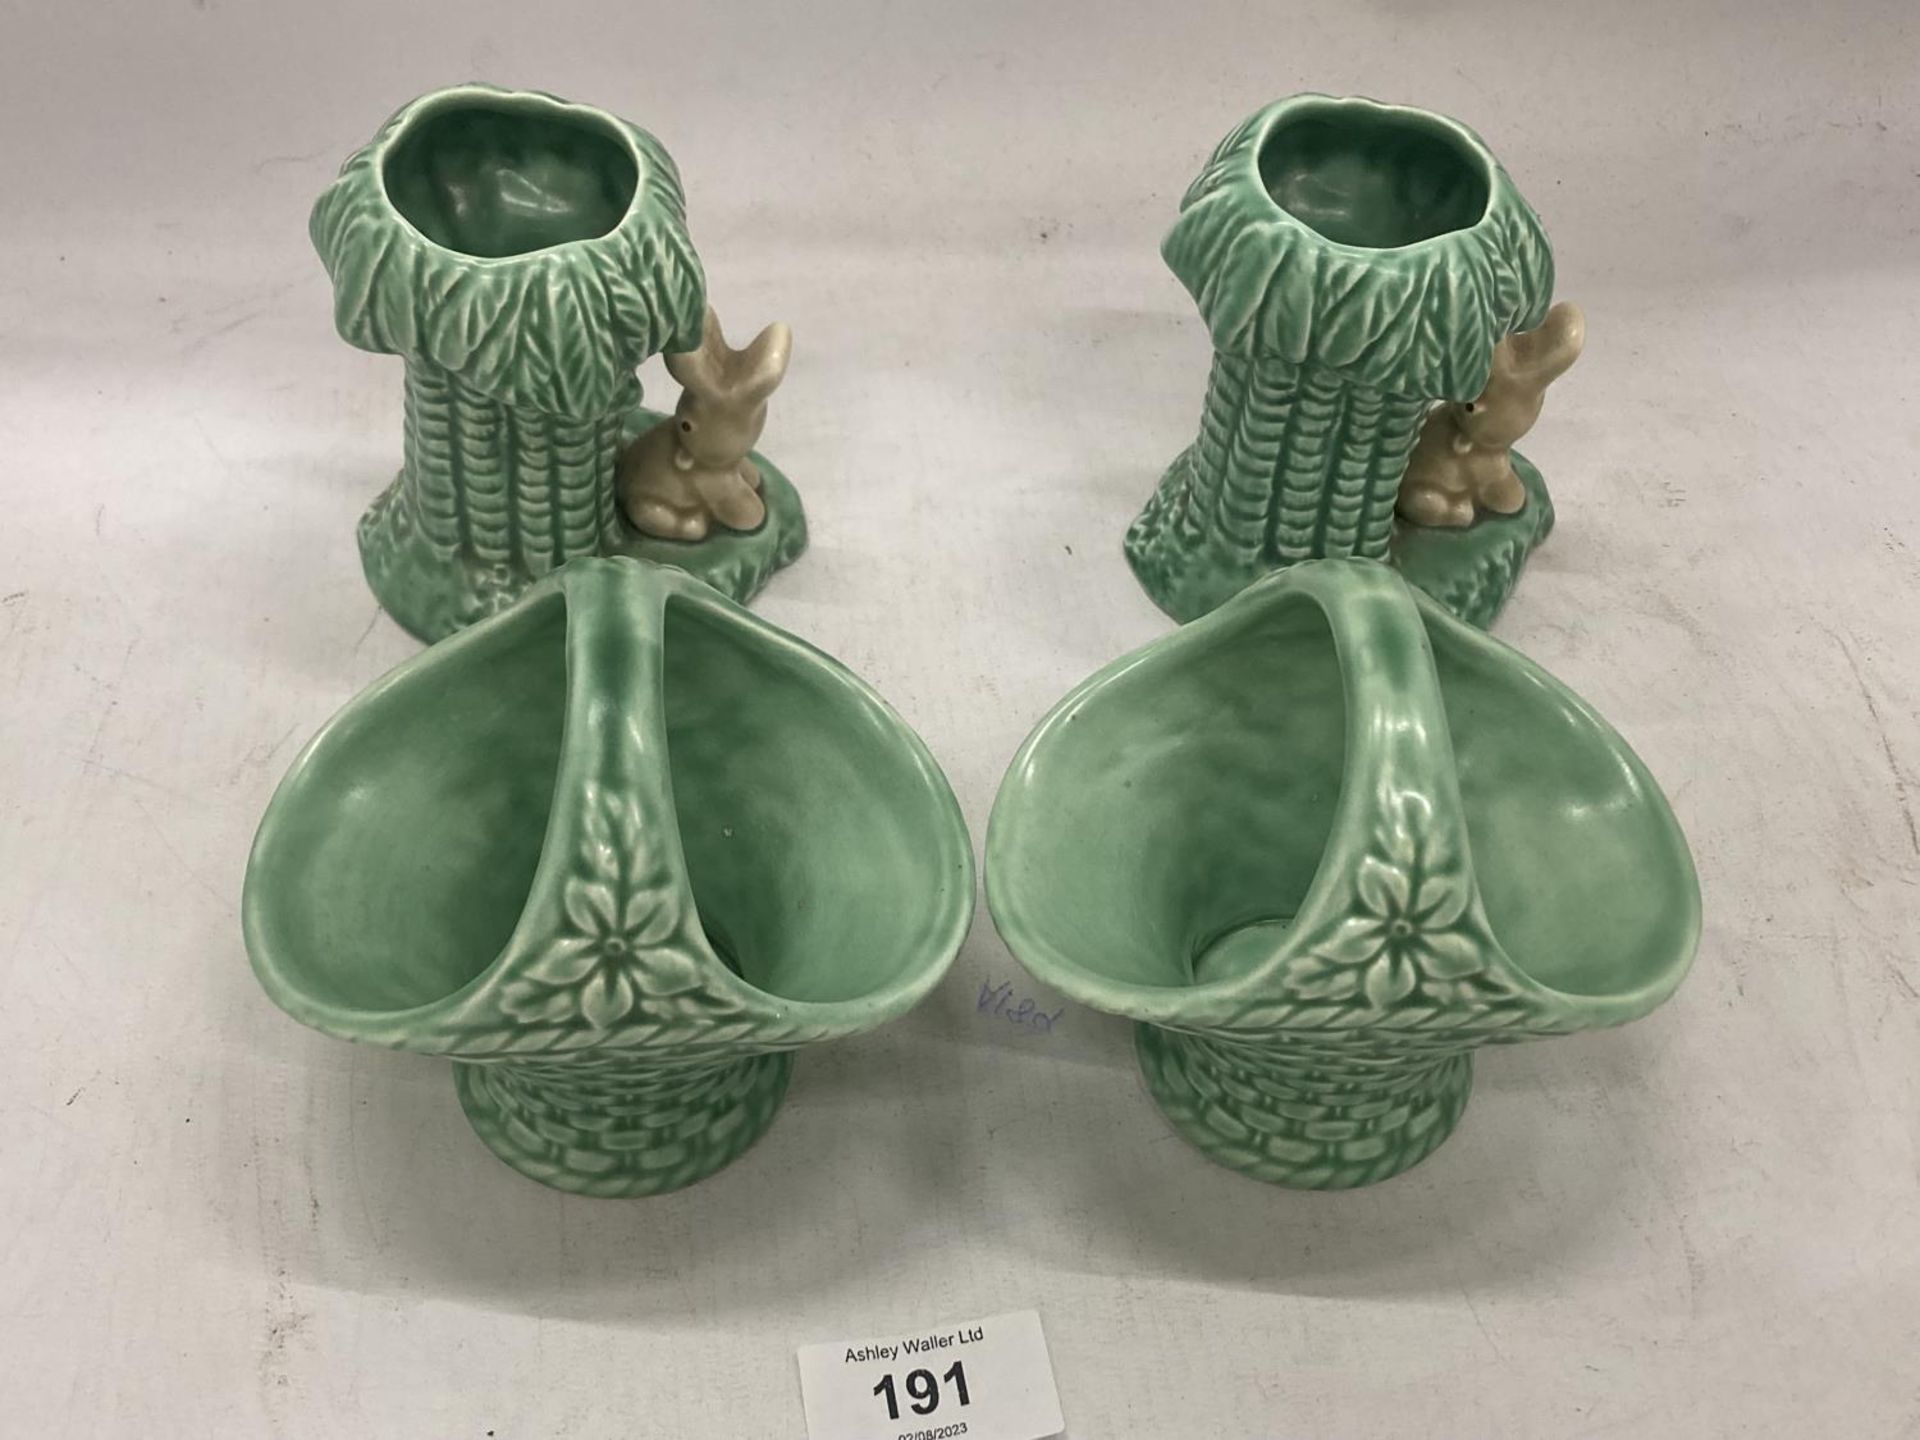 FOUR PIECES OF SYLVAC TO INCLUDE VASES WITH RABBITS AND BASKETS